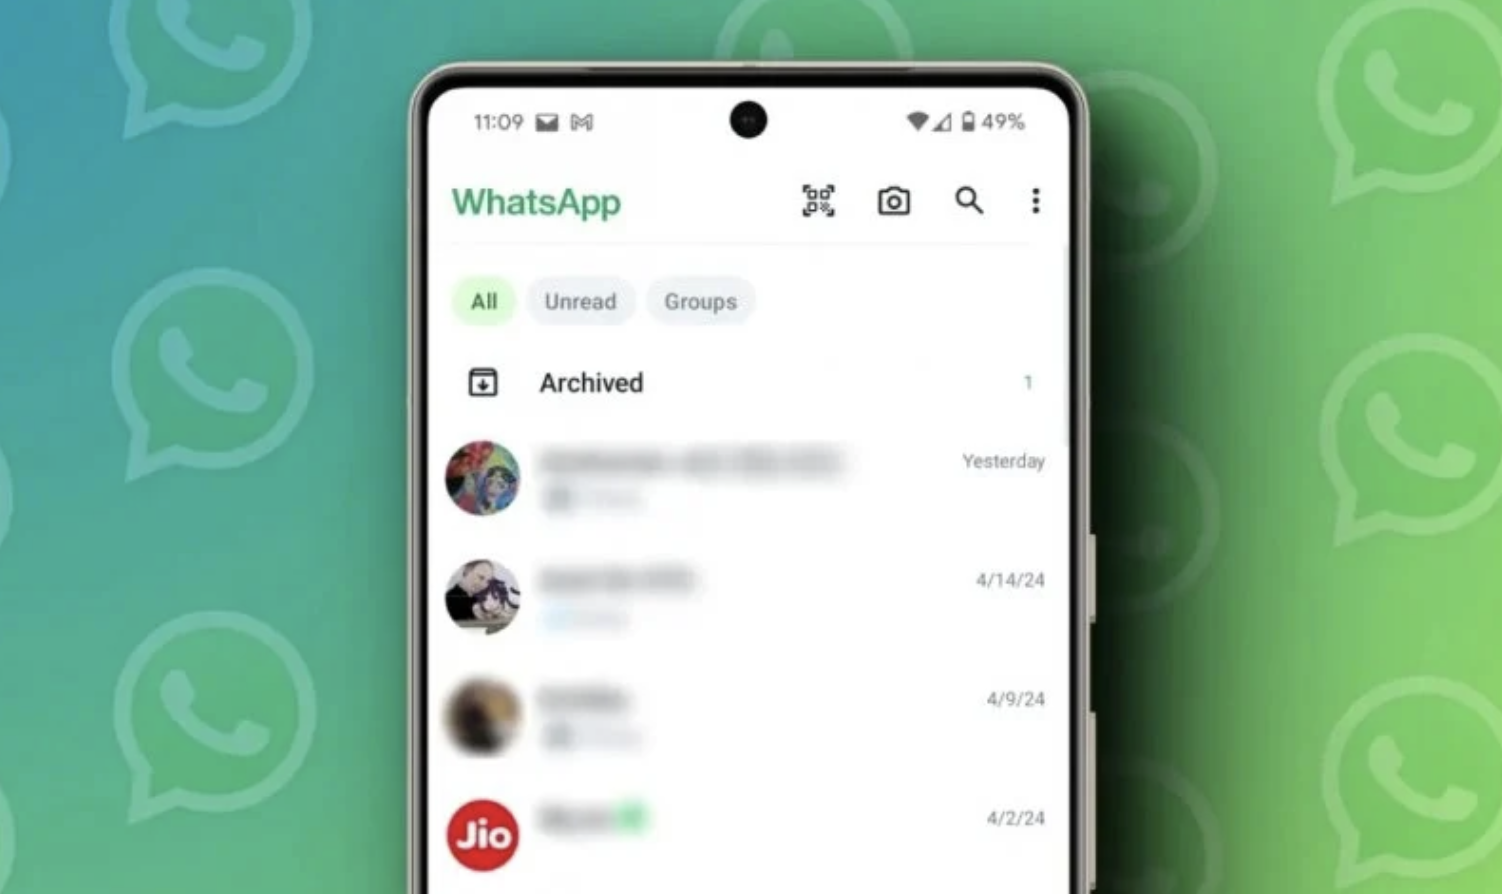 How WhatsApp’s new chat filters function